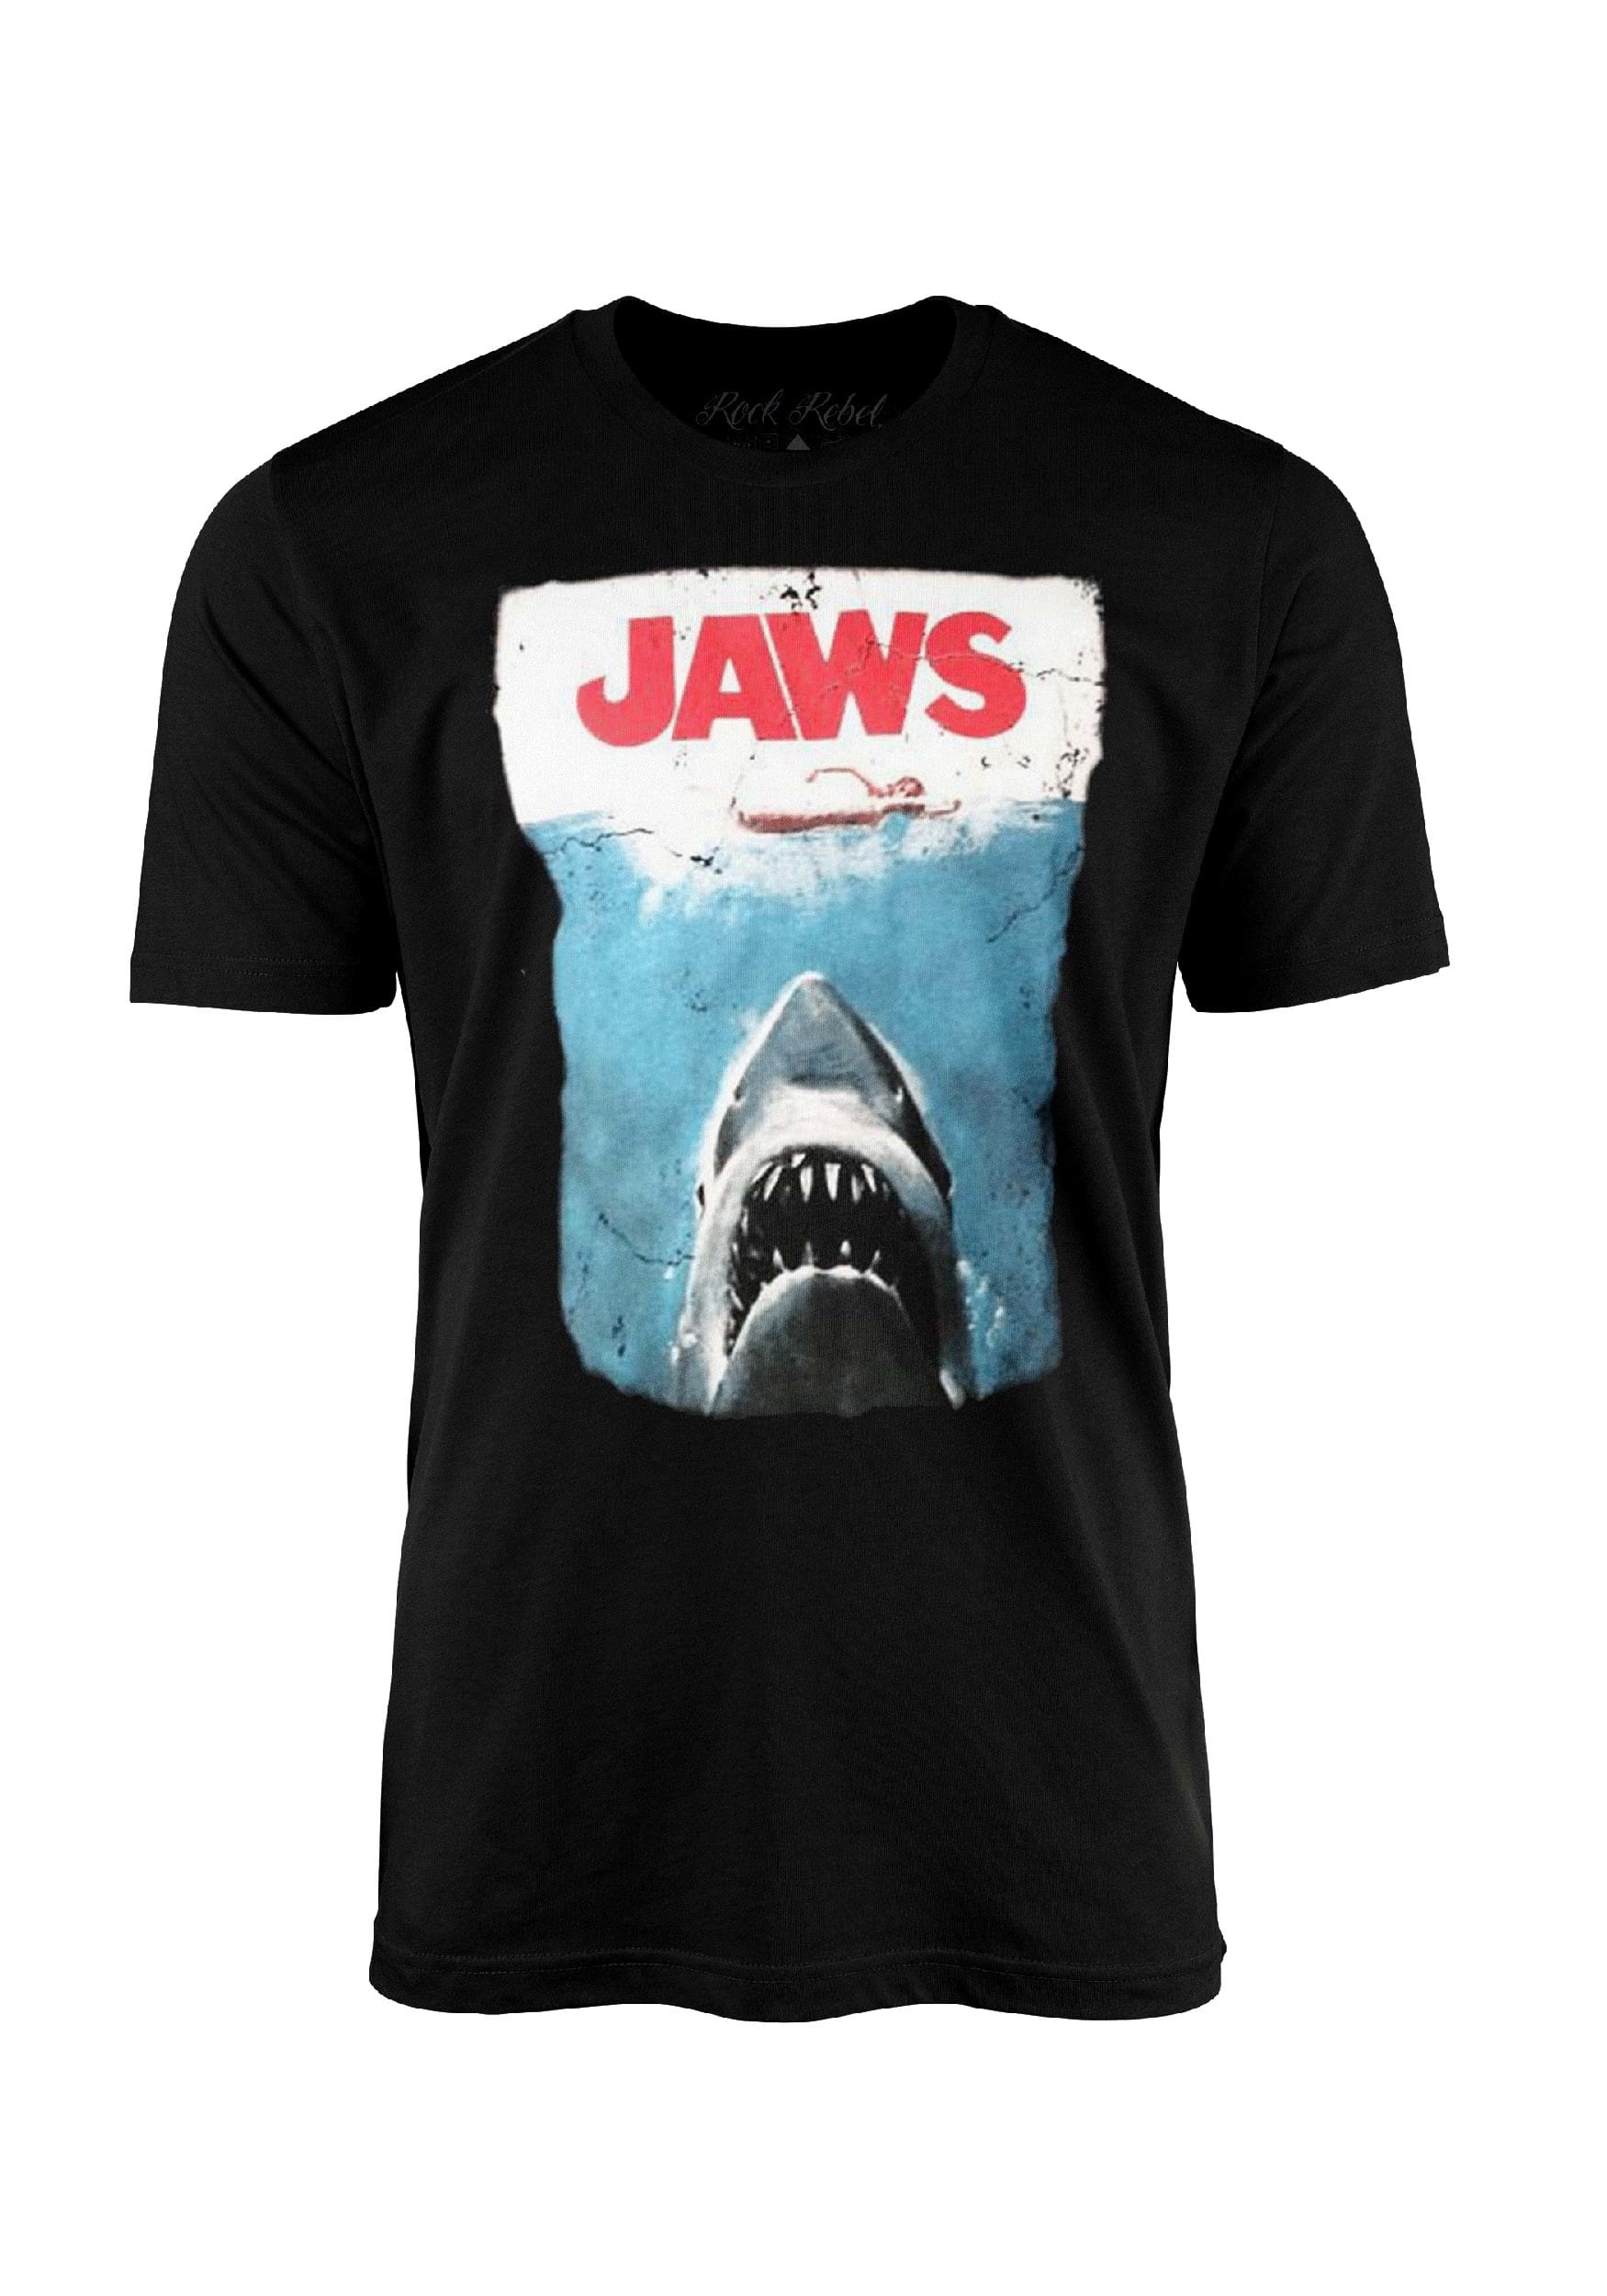 Jaws Poster Graphic Tee